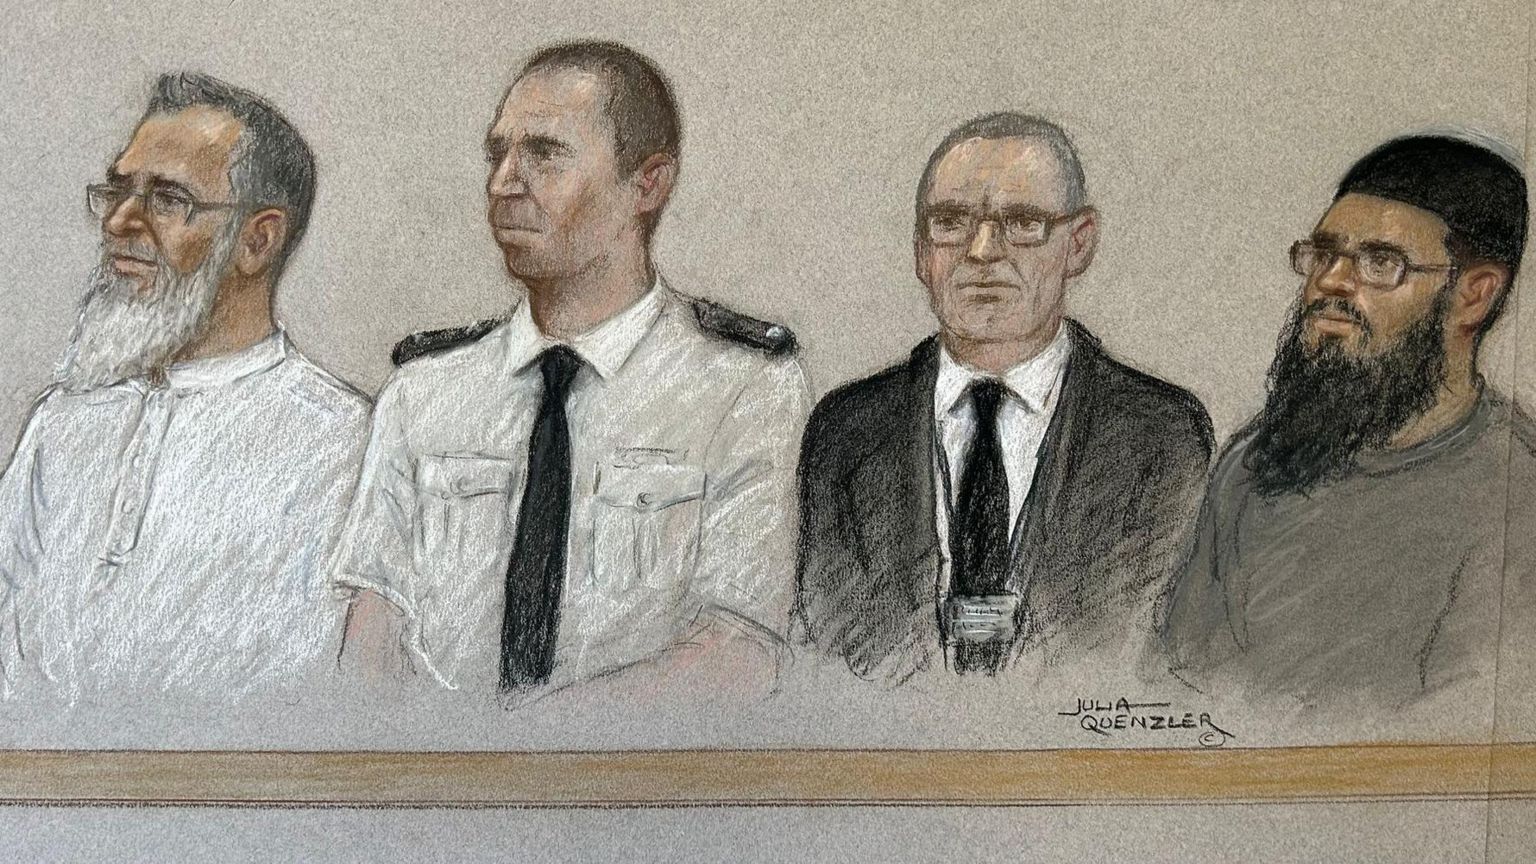 A courtroom sketch that shows Anjem Choudary, two police officers, and another man, Khaled Hussein